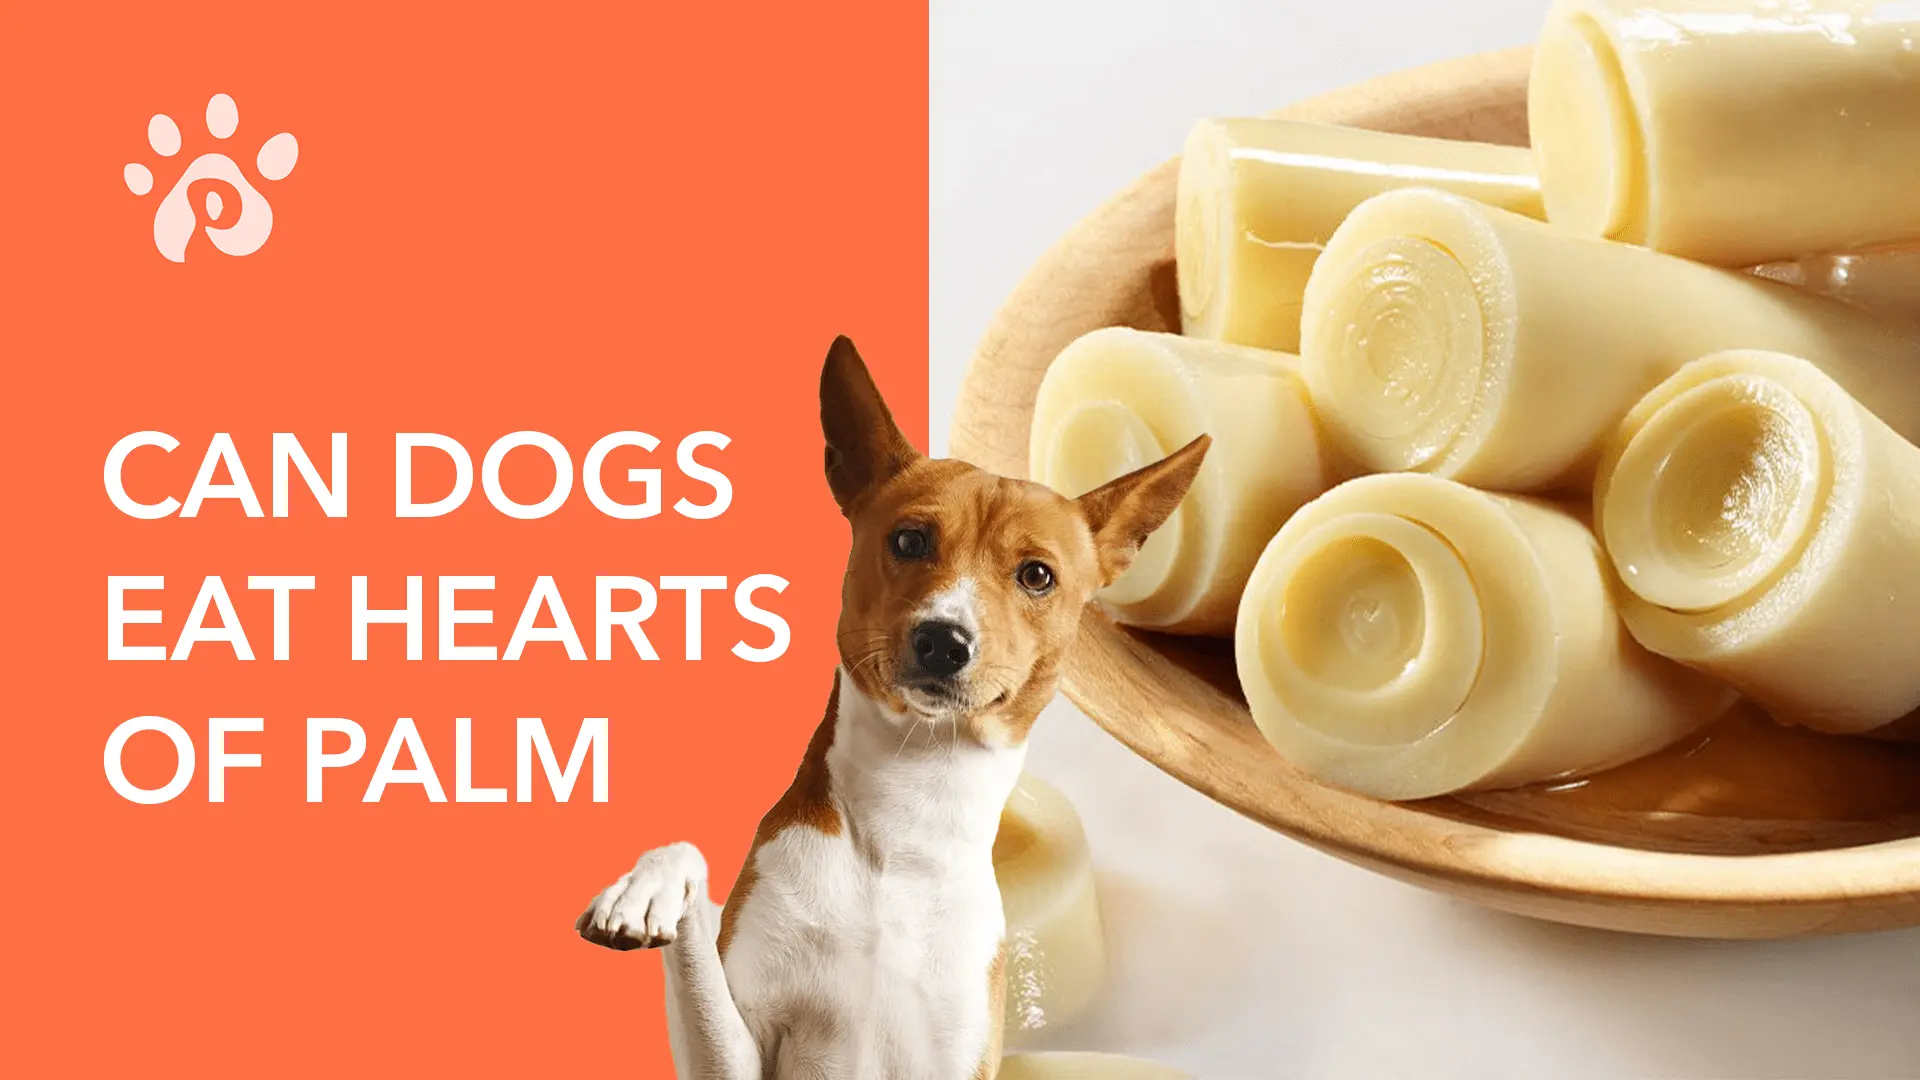 Can Dogs Eat Hearts of Palm?